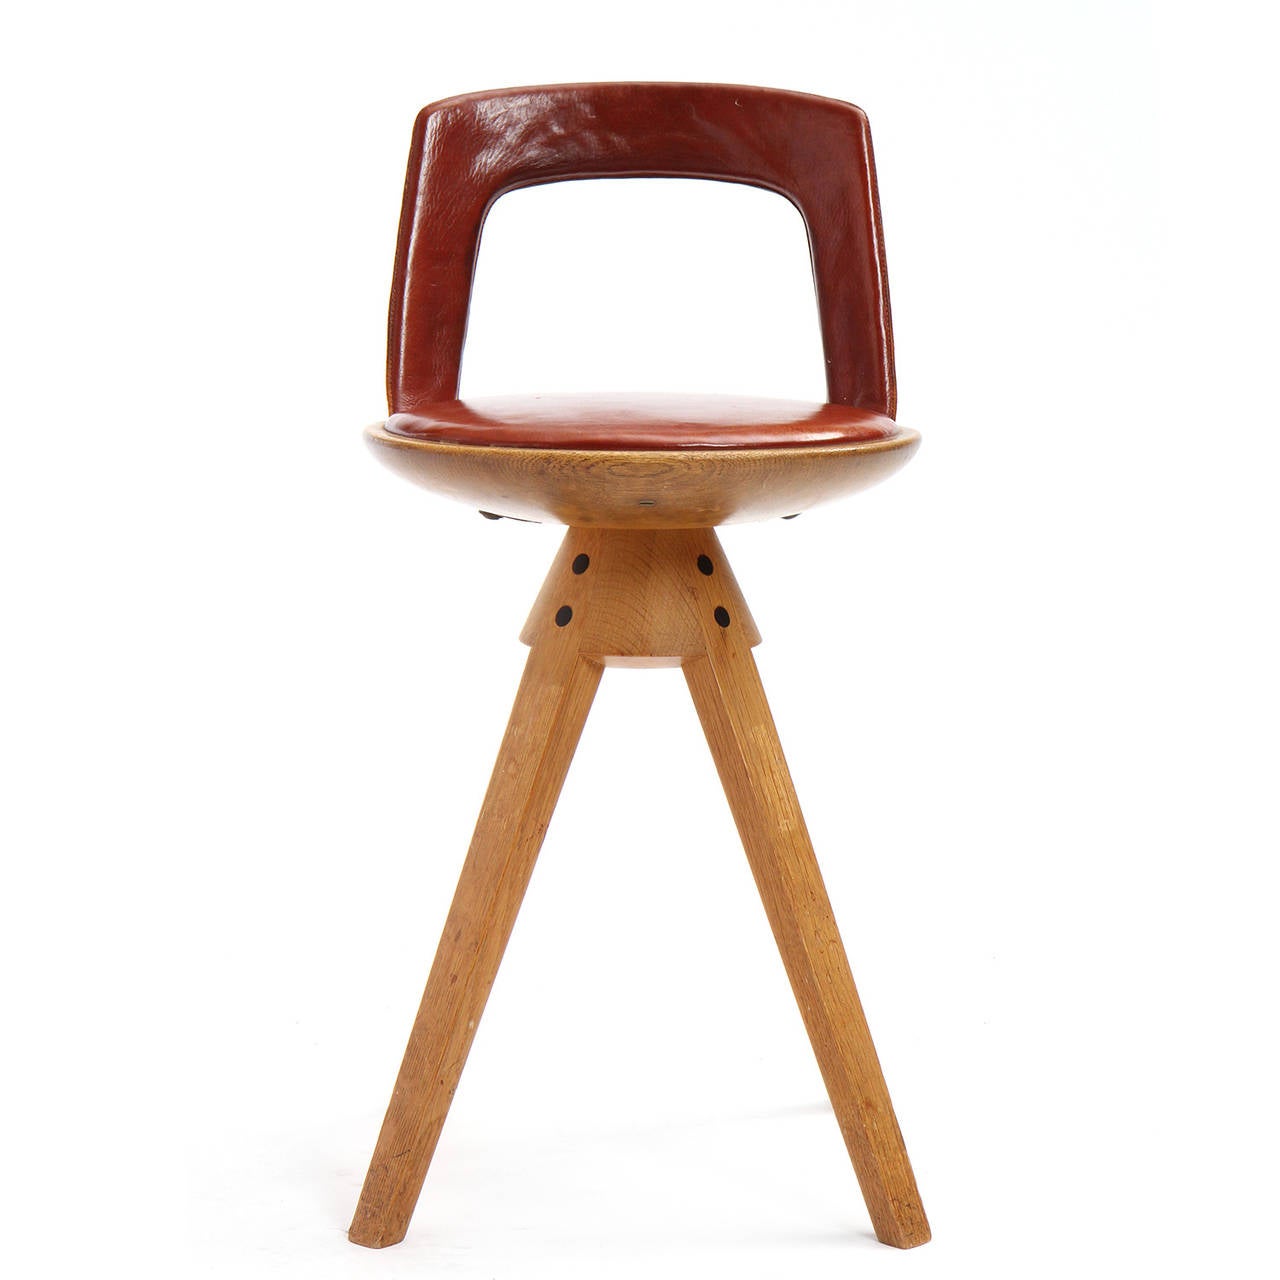 A rare swivel seat stool with a low leather backrest and seat cushion, on splayed oak tapered legs.